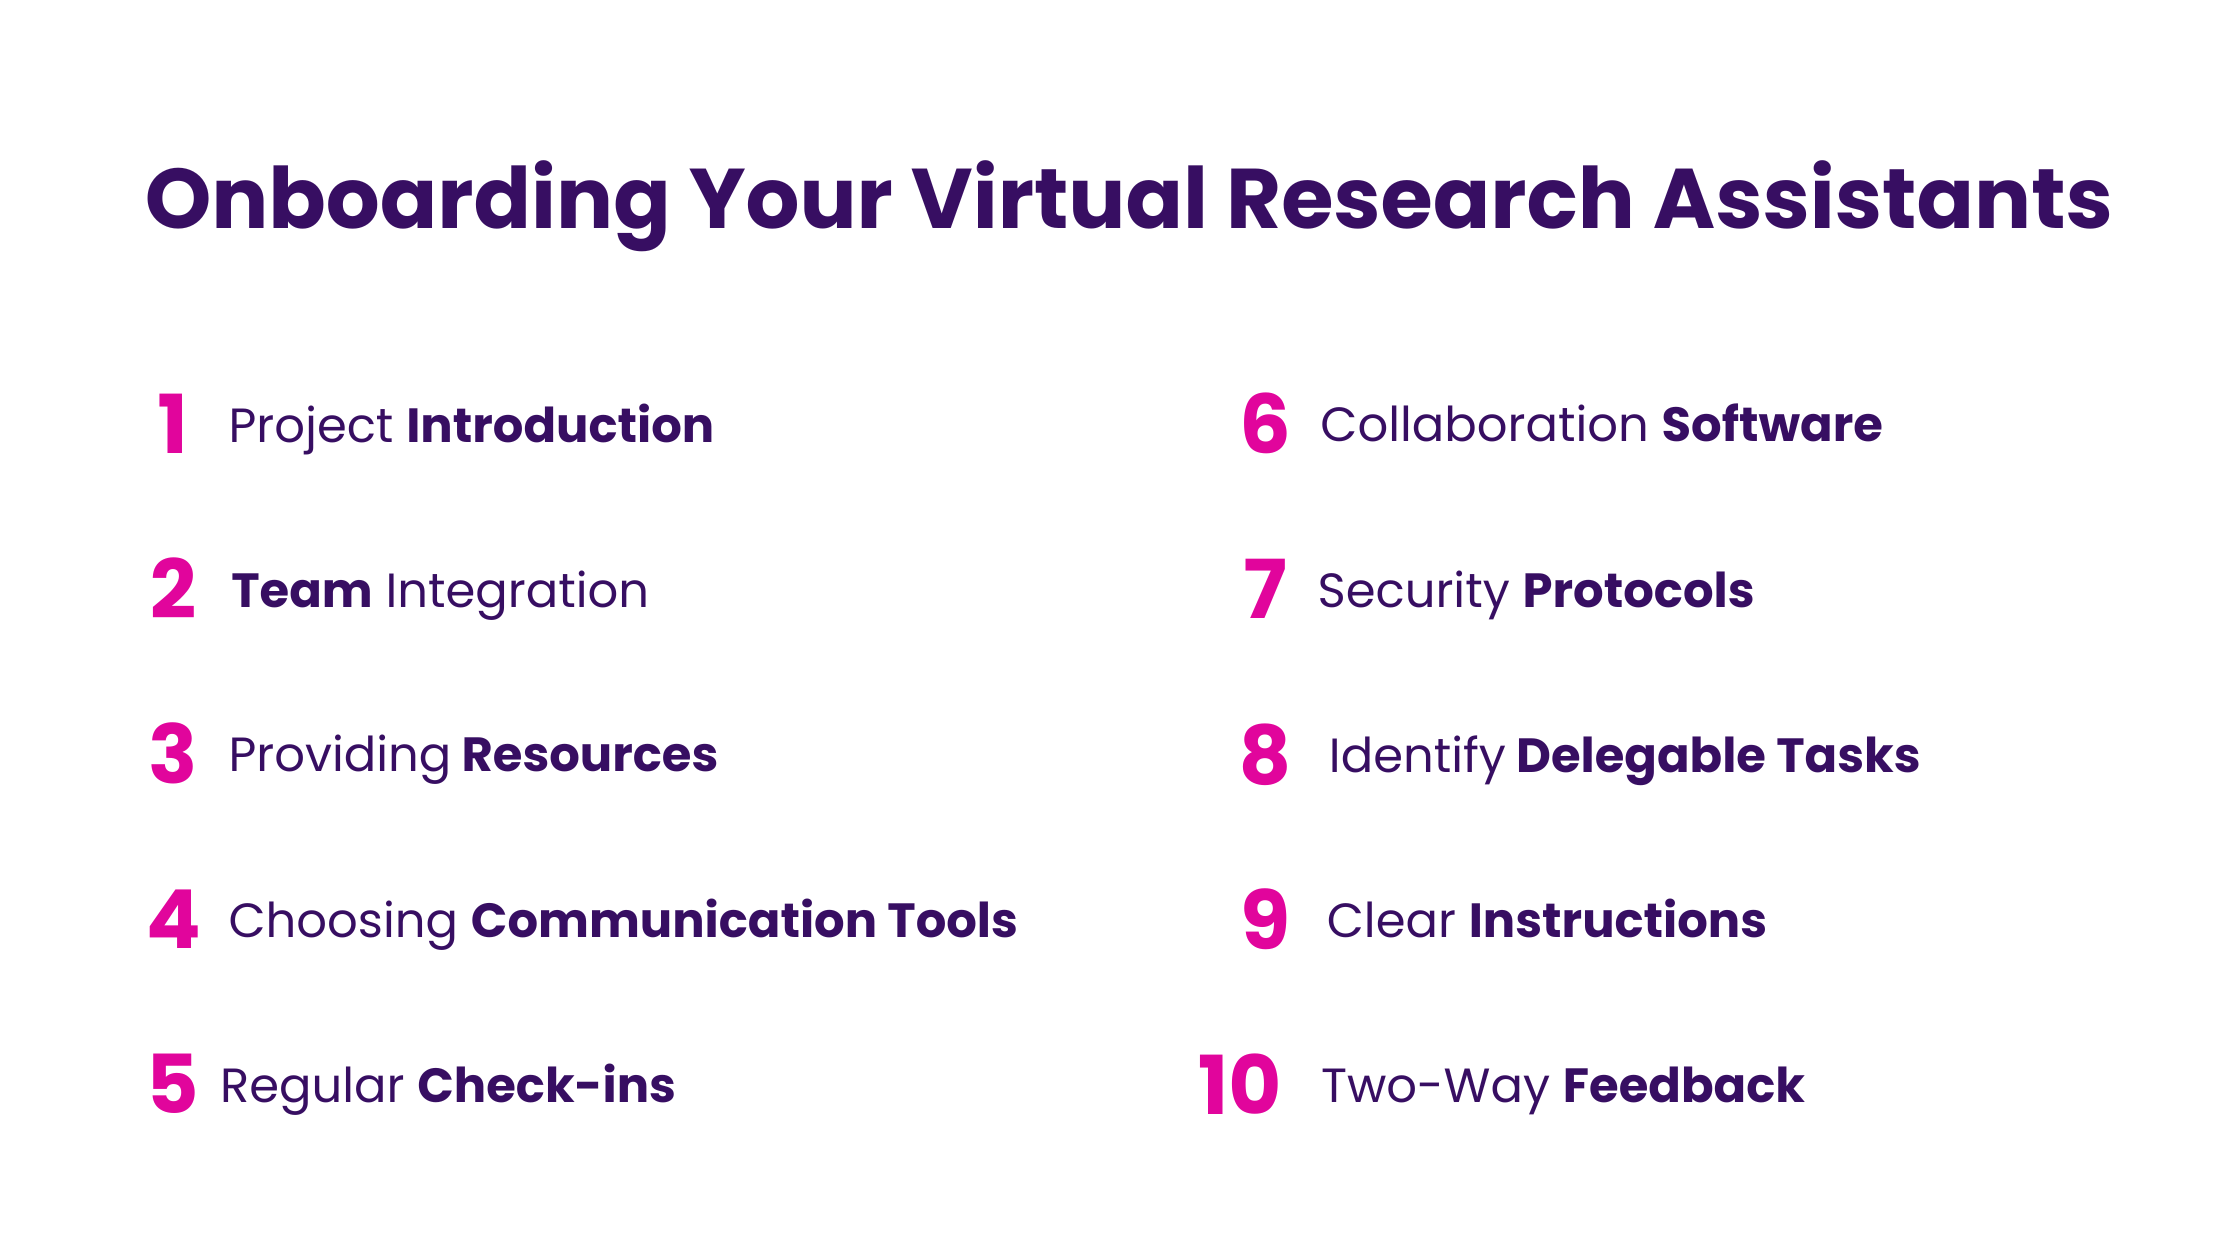 Onboarding Your Virtual Research Assistants